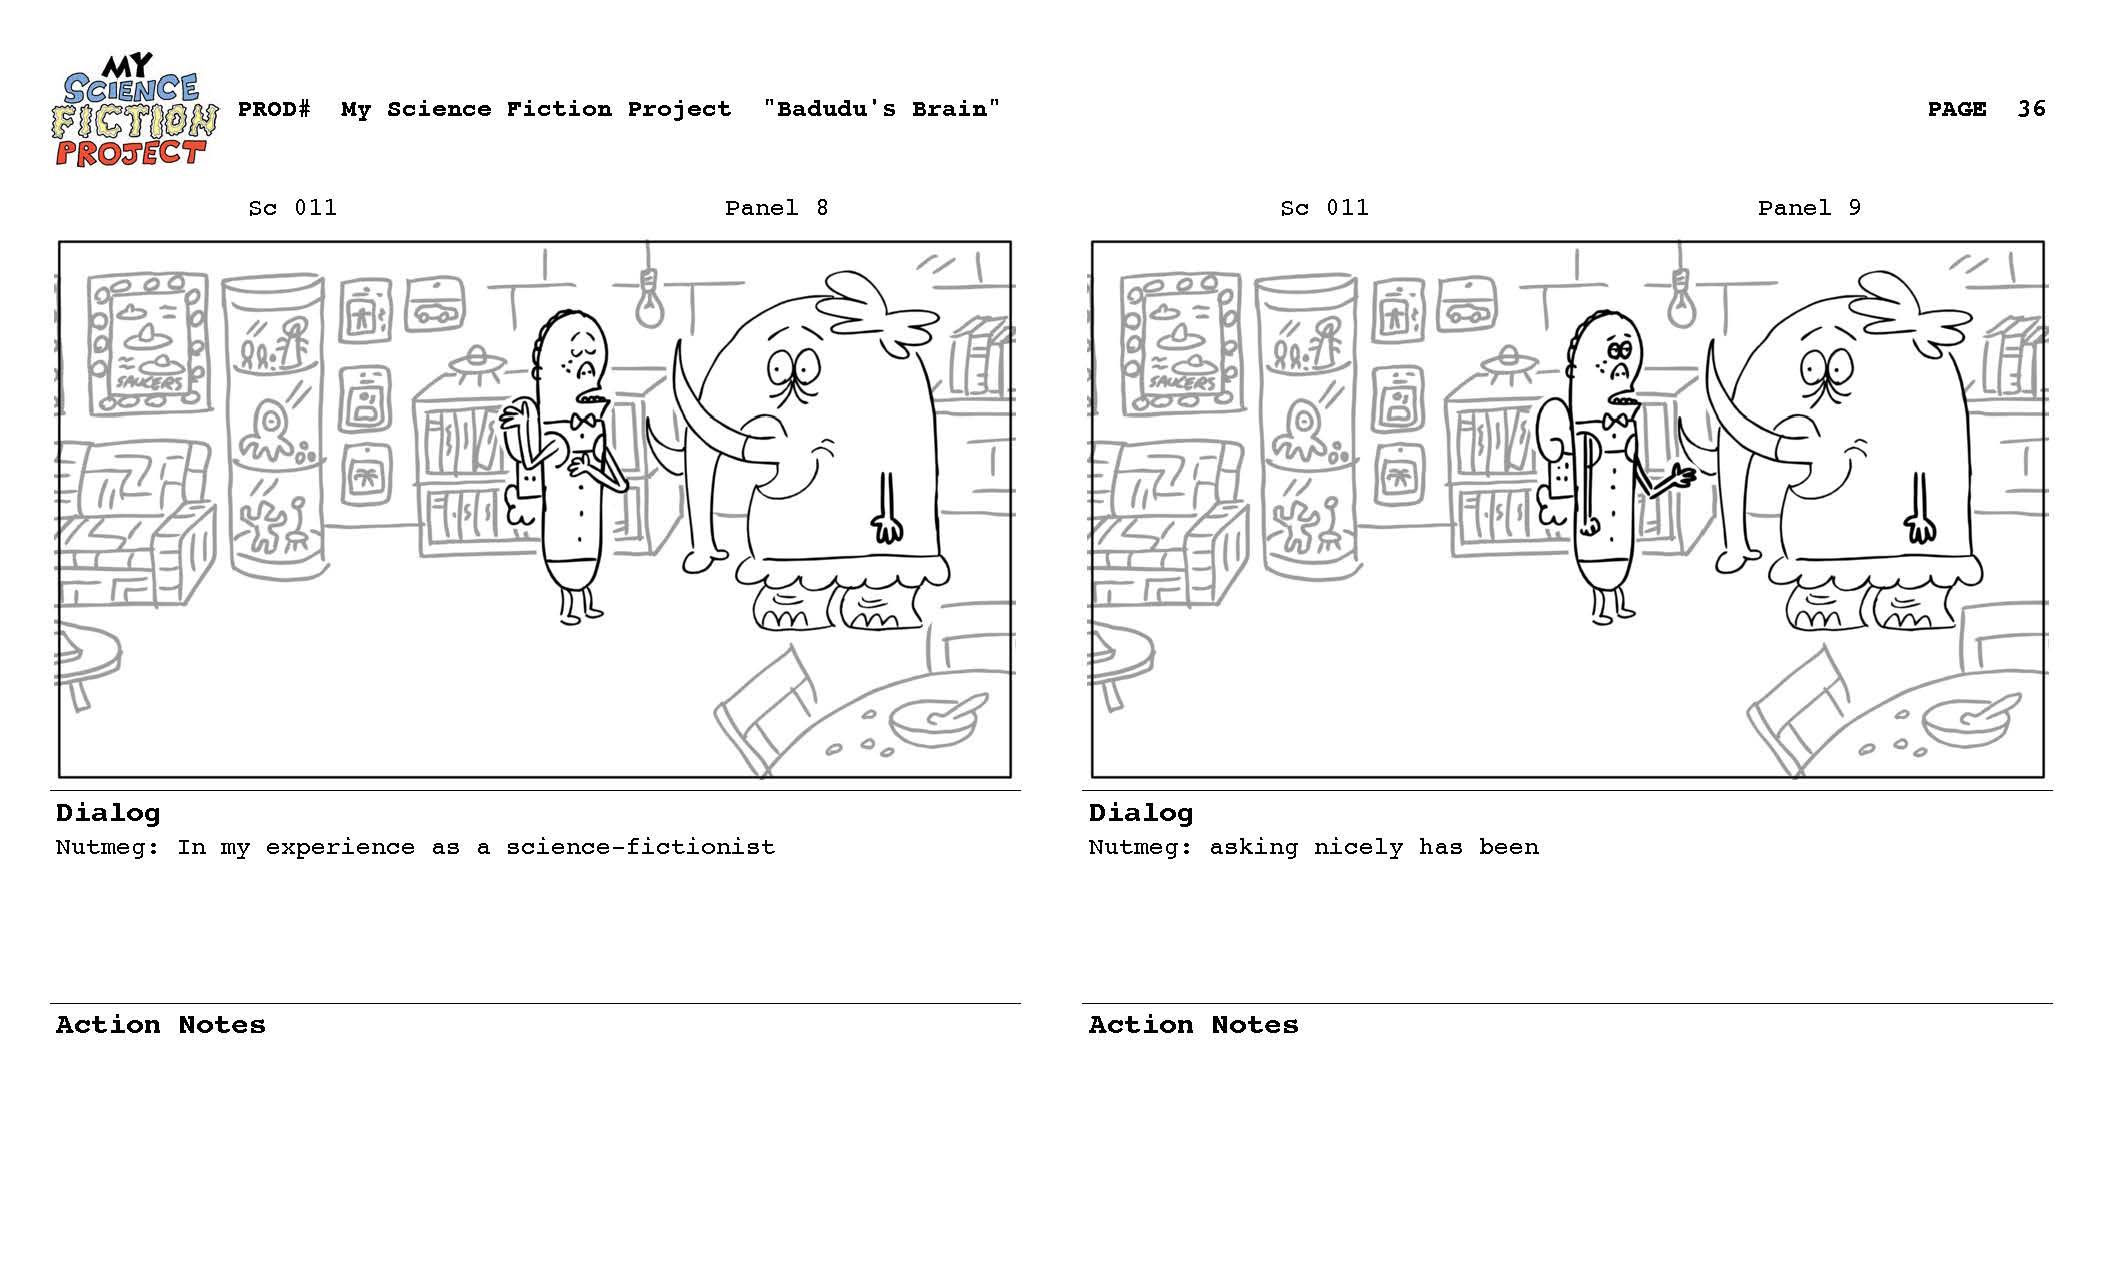 My_Science_Fiction_Project_SB_083112_reduced_Page_036.jpg